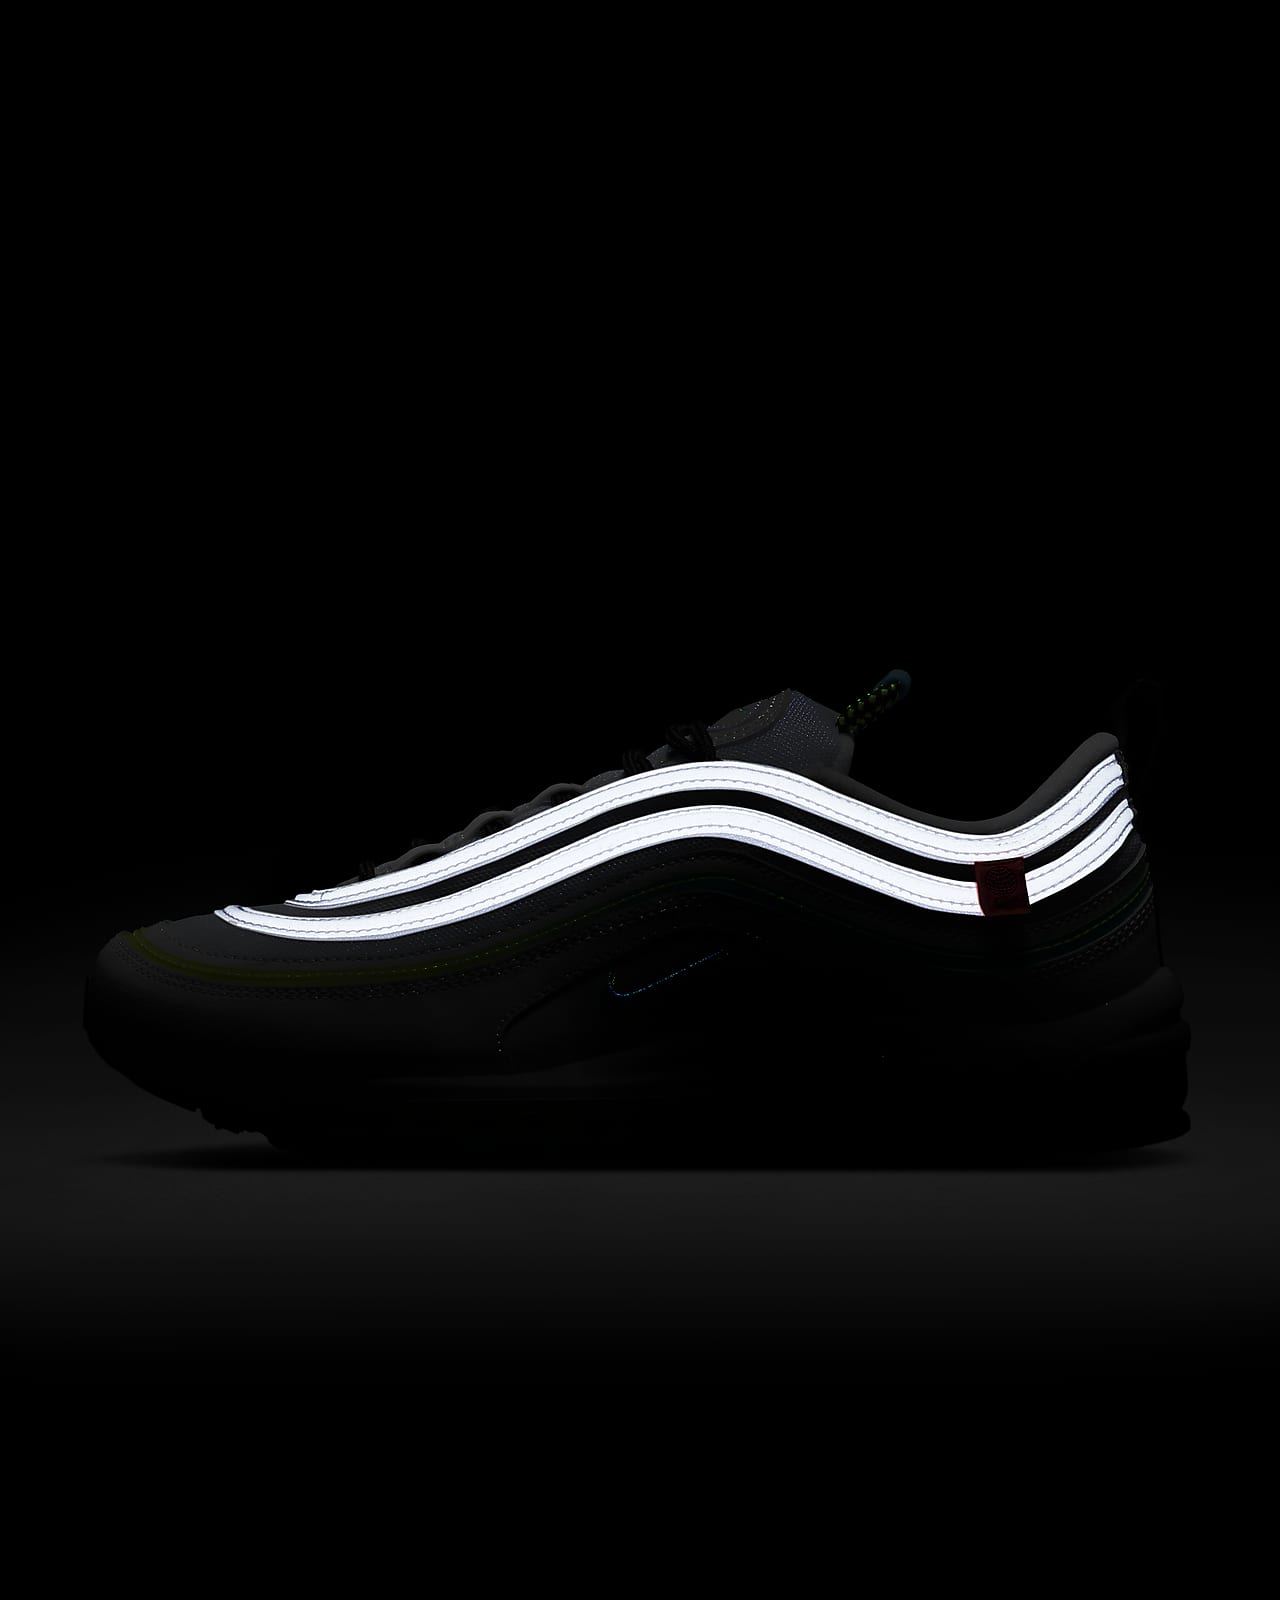 cyber monday air max 97